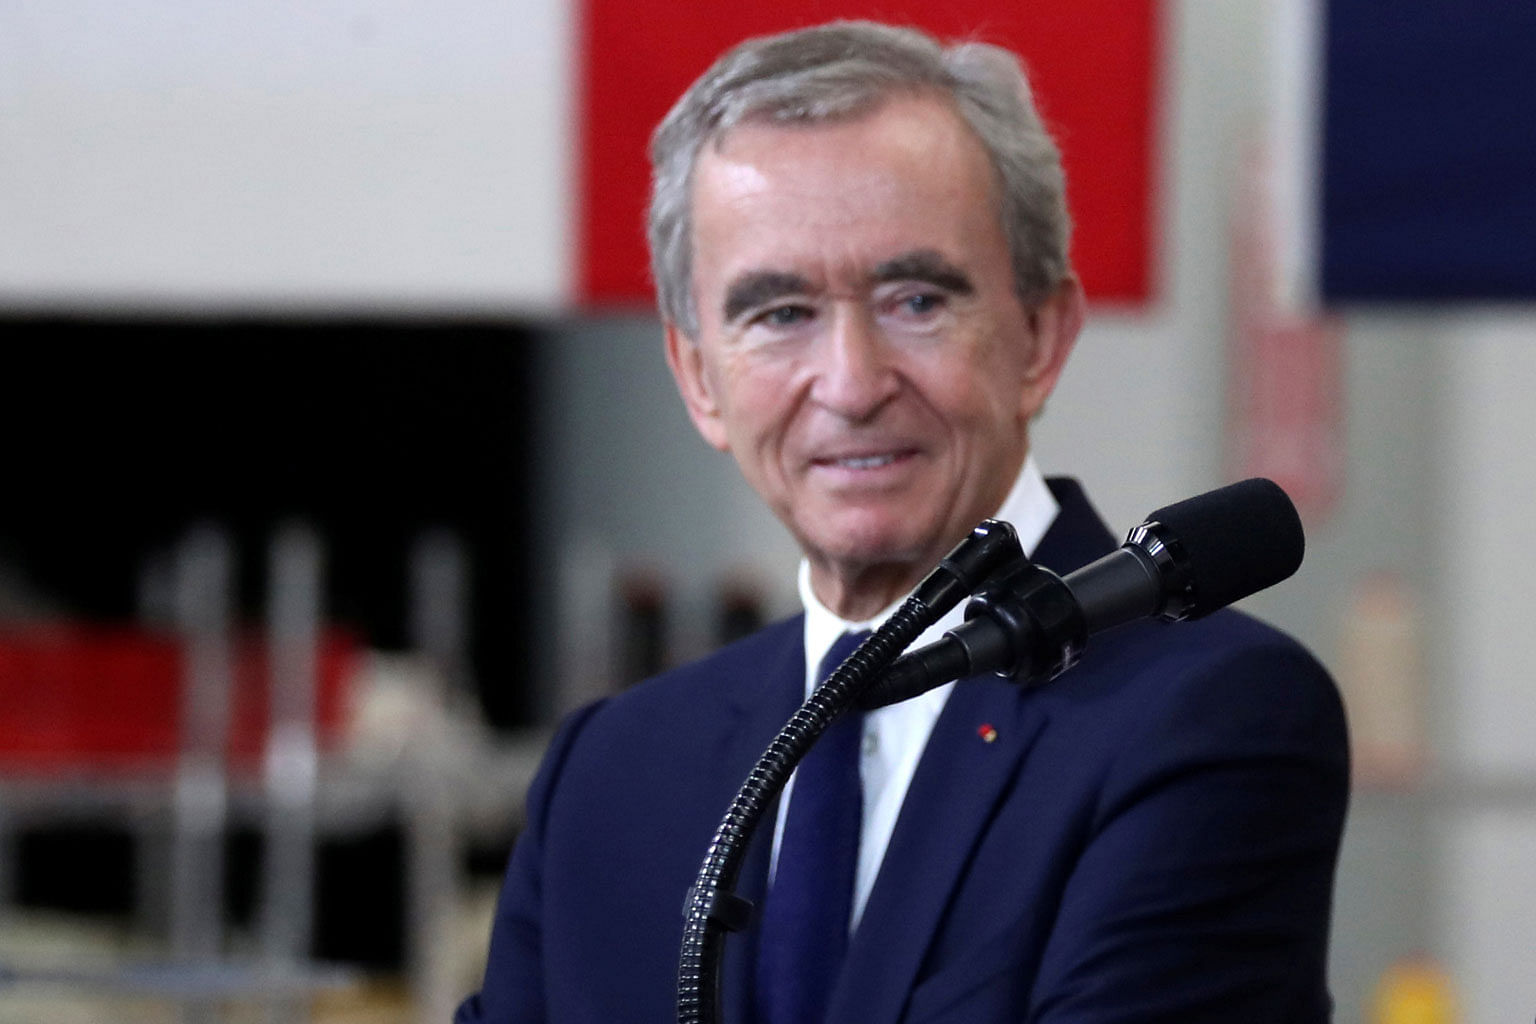 Tycoon Bernard Arnault looks ready to add to his jewellery collection, with his luxury goods giant LVMH pursuing a takeover of Tiffany & Co. The acquisition would boost LVMH's presence in the United States.